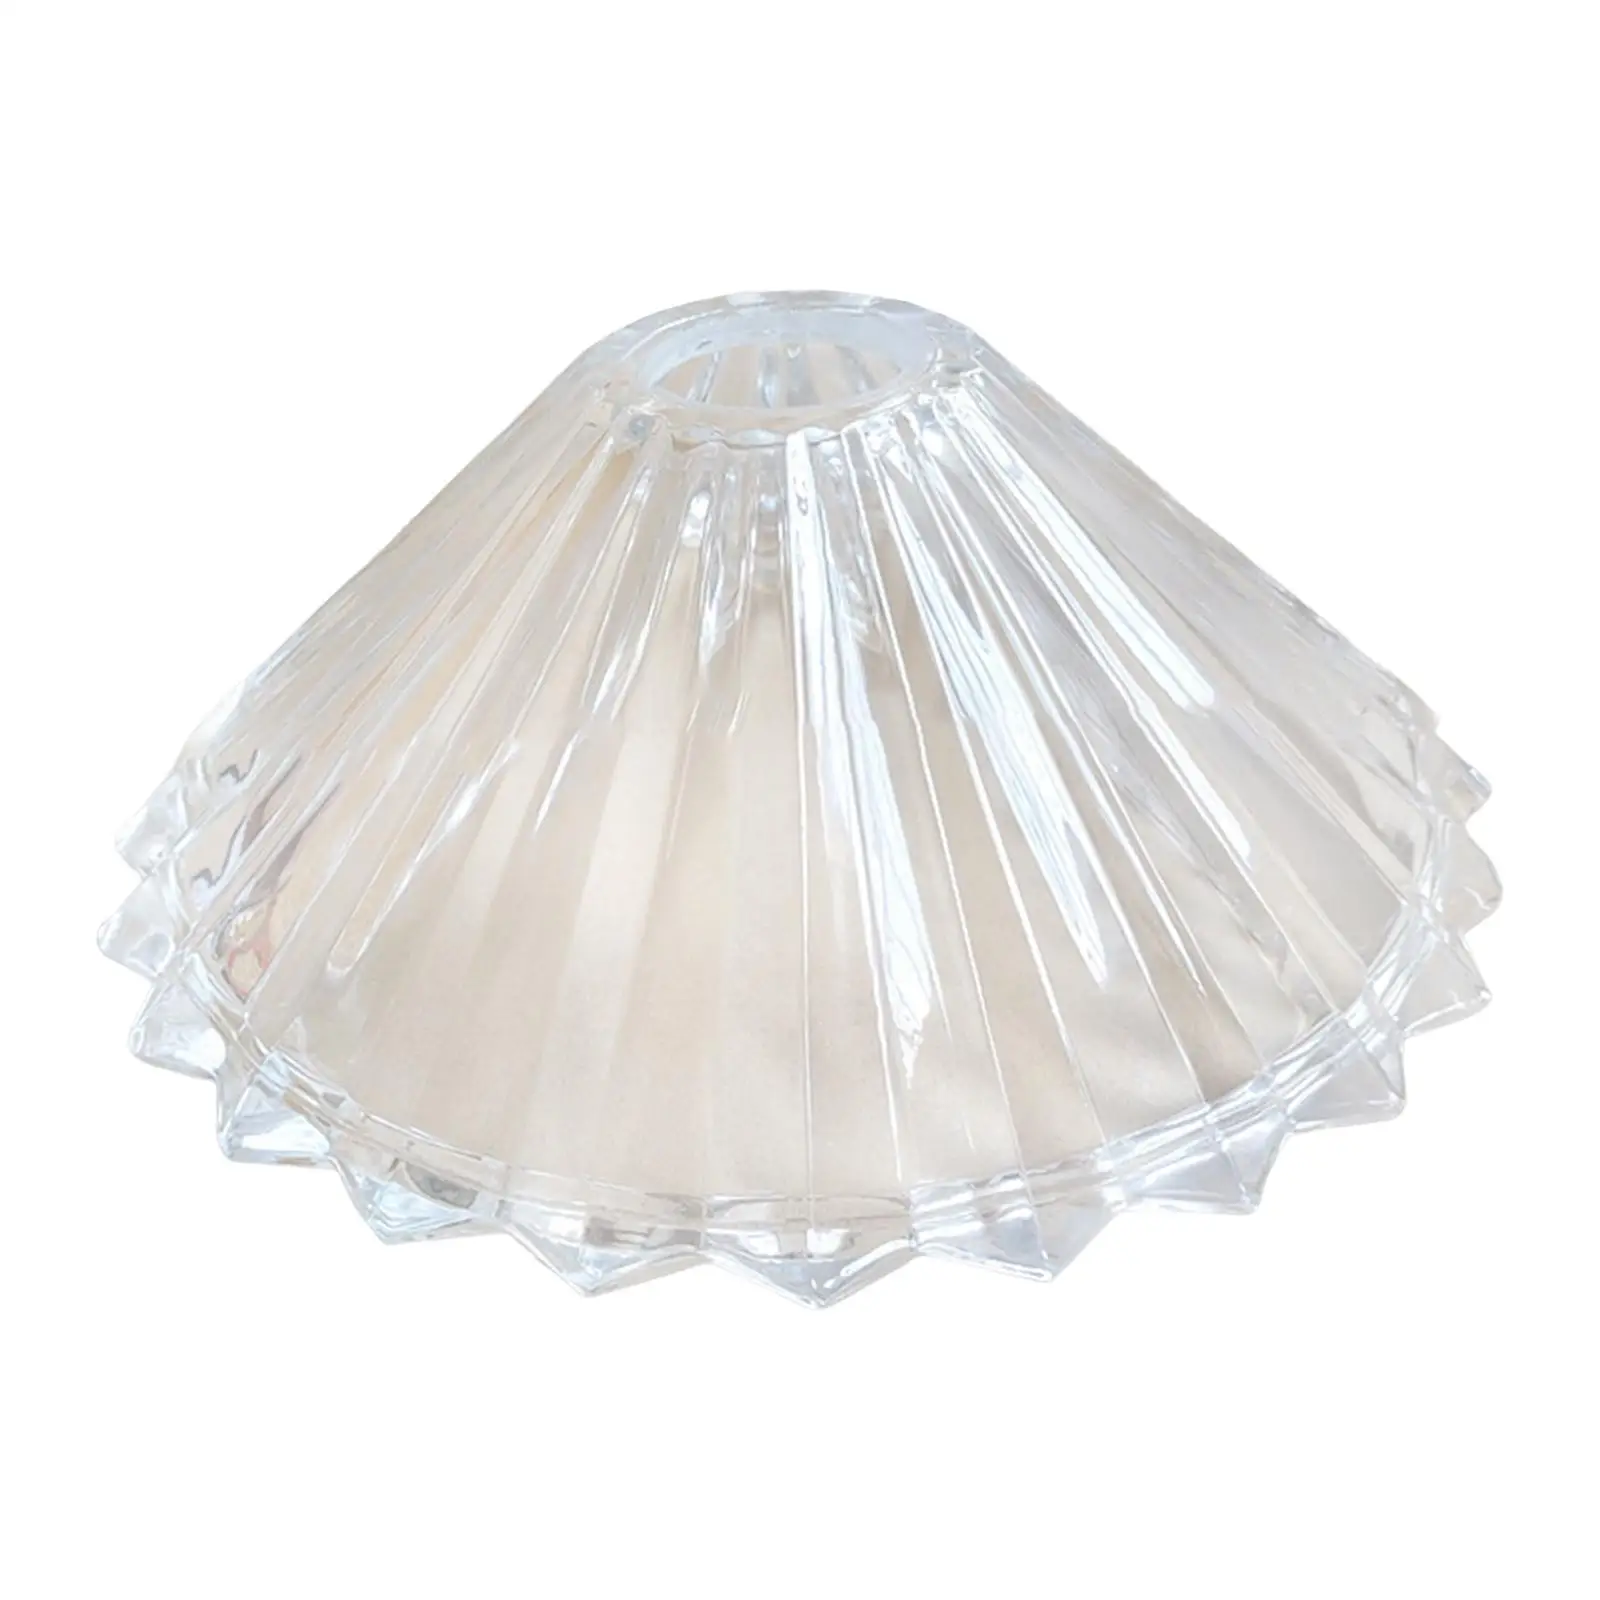 Crystal Lamp Shade Cover Replacement Ceiling Glass Shade for Dining Room Bar